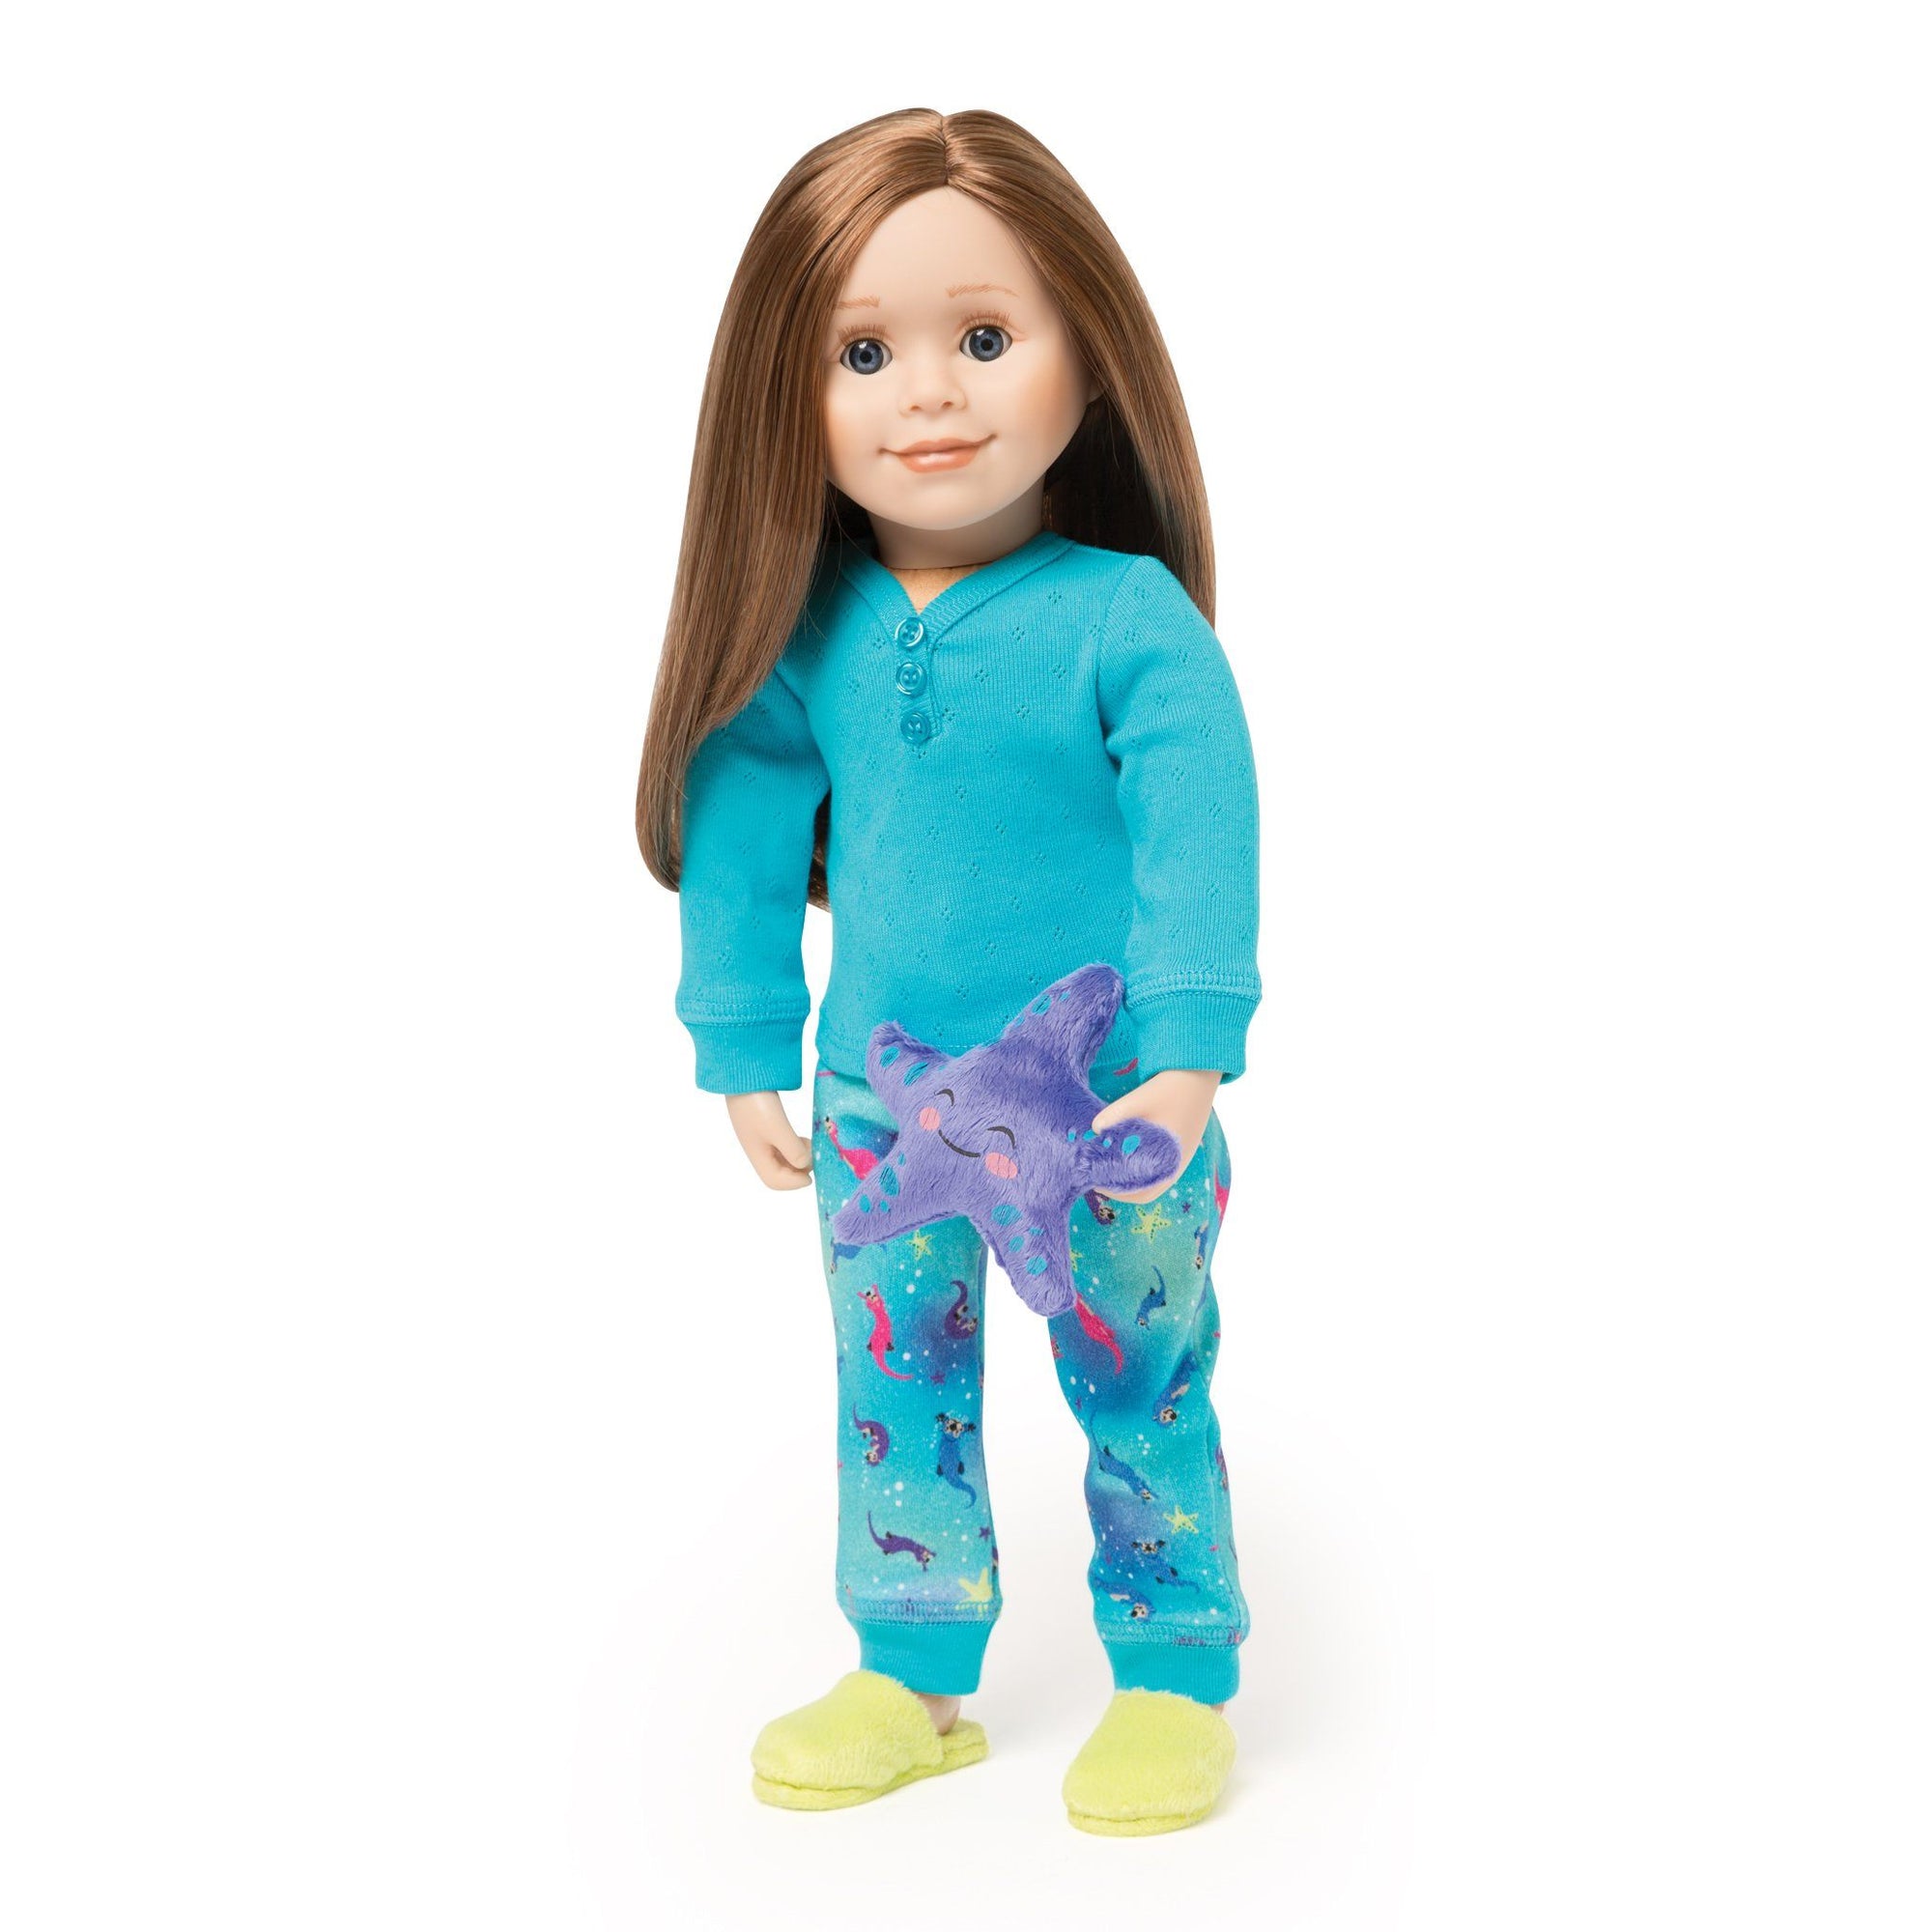 Sea Otter Sleepwear 2-piece pyjamas with long-sleeve blue henley, sea otter patterned blue PJ pants, bright green fuzzy slippers and a plush purple sea star fit all 18 inch dolls. 